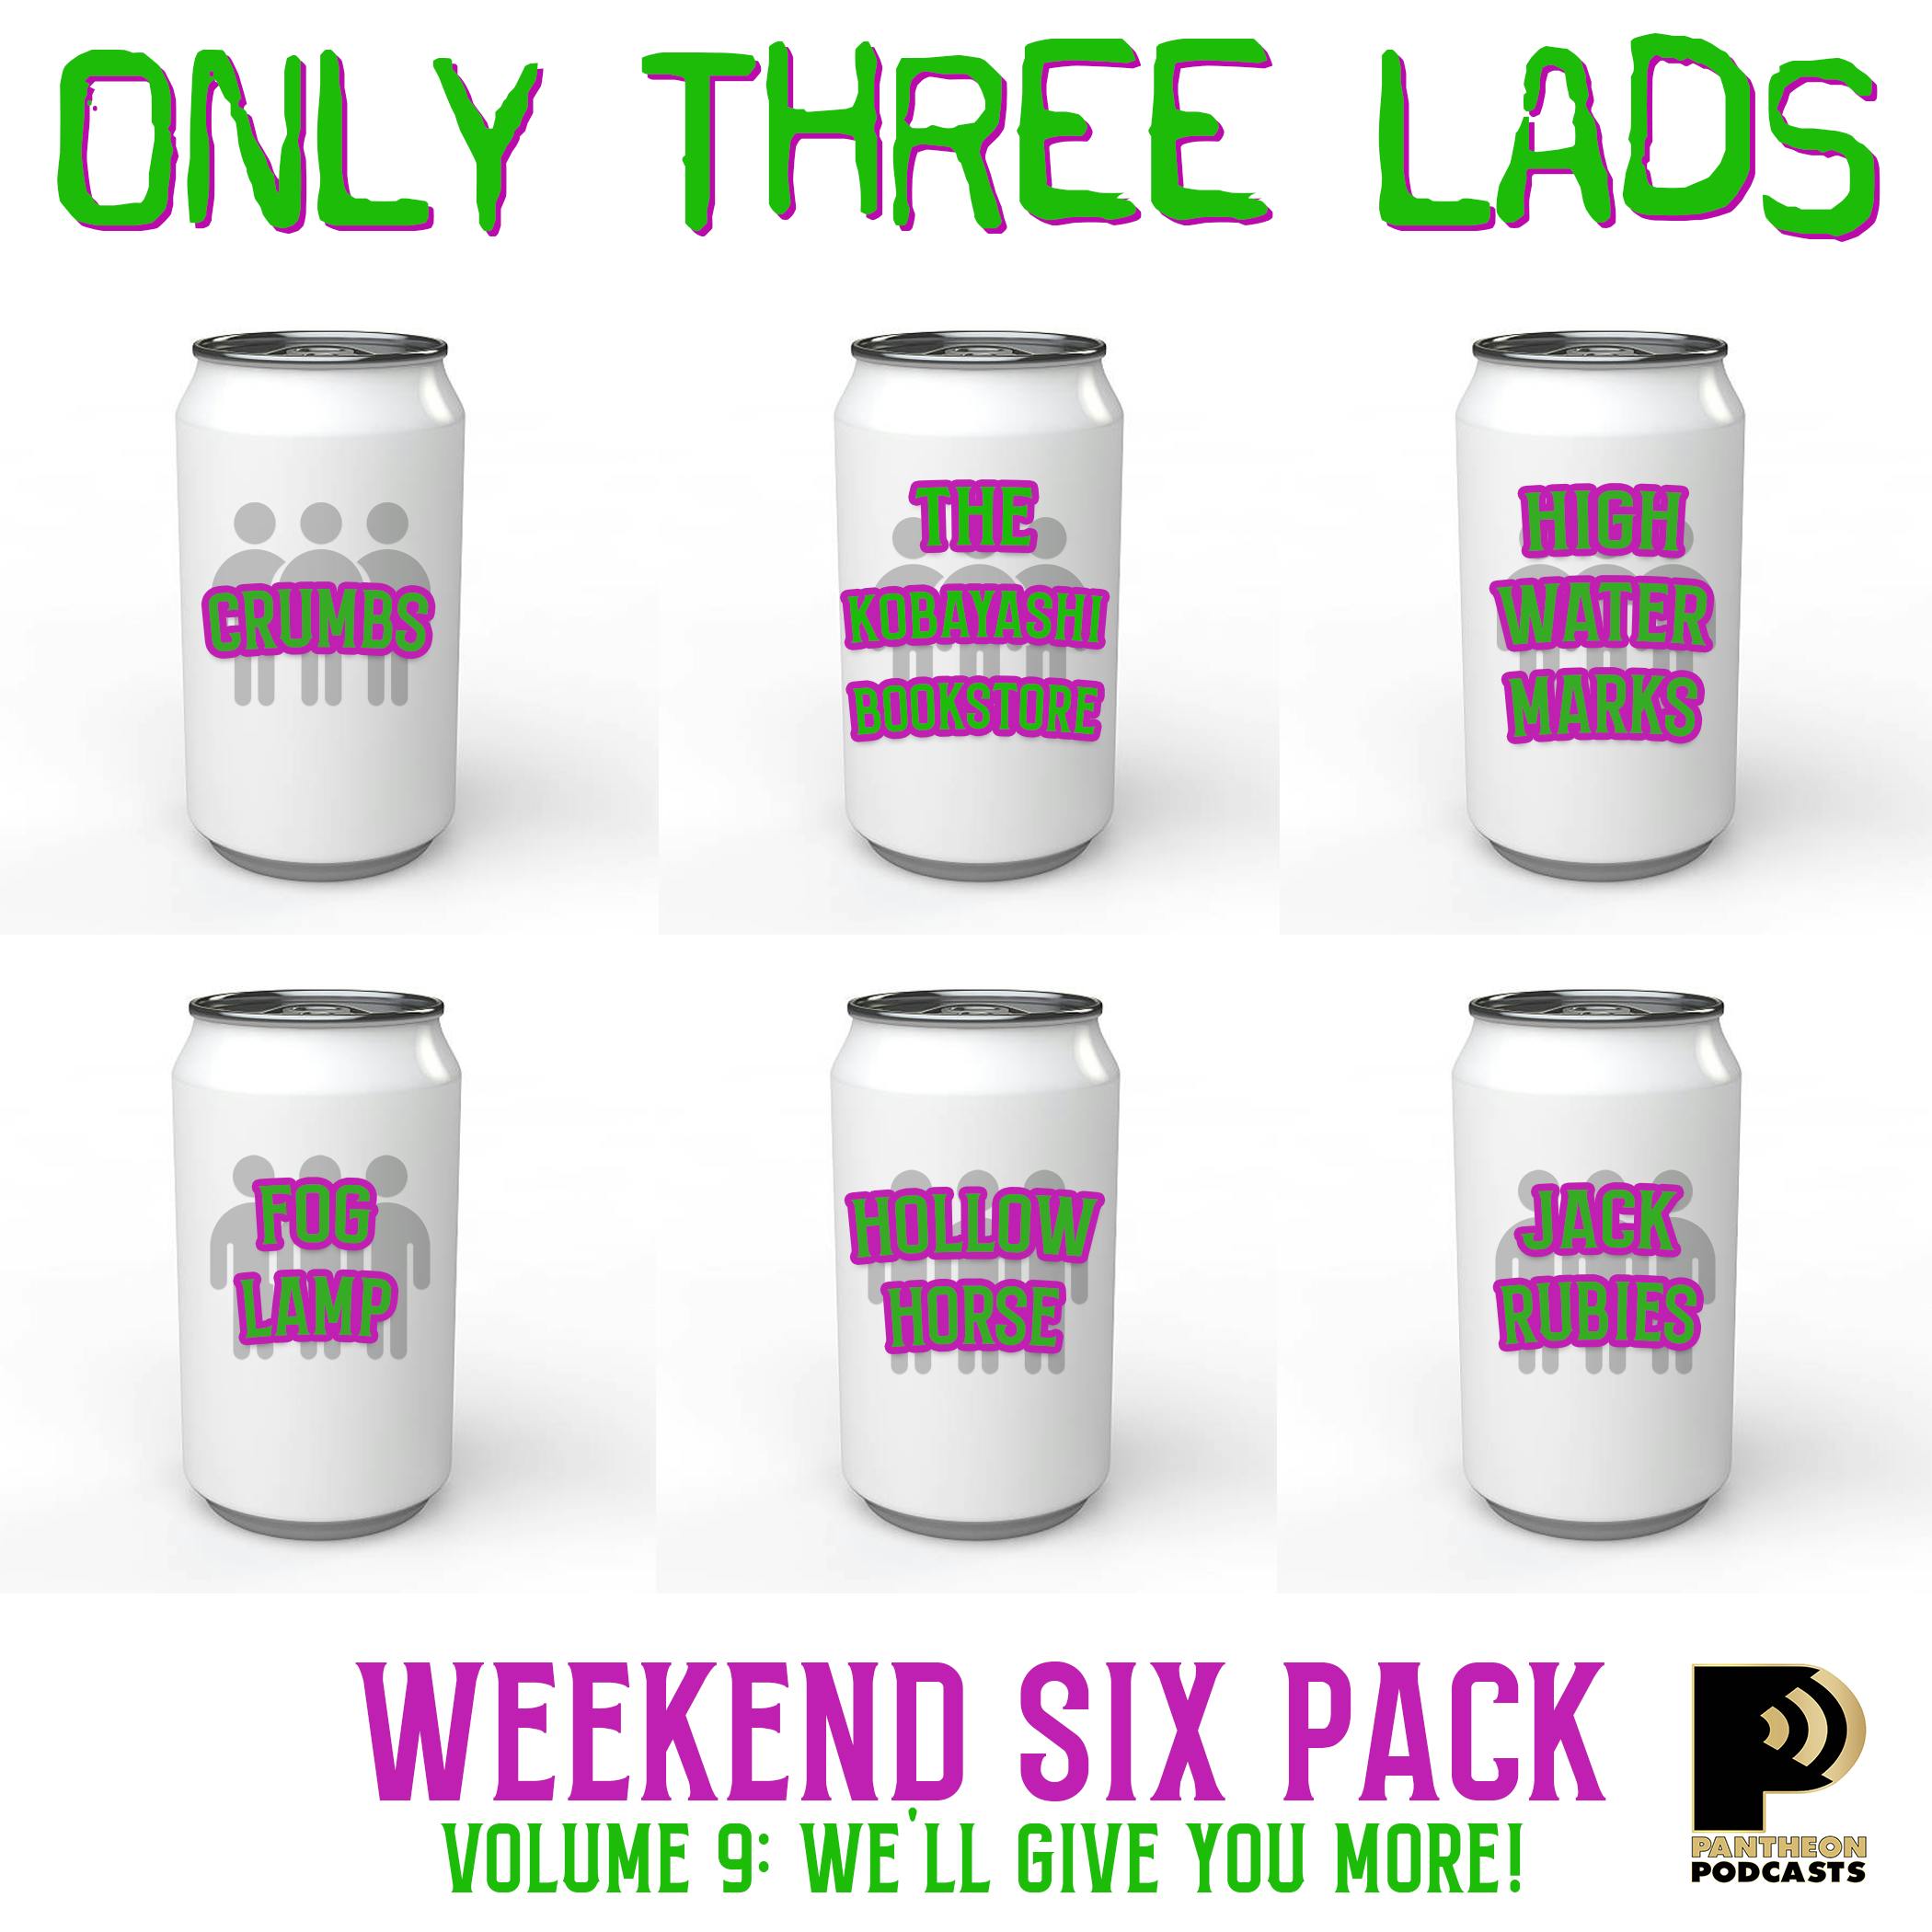 O3L Presents: Weekend Six Pack, Vol. 9 - We'll Give You More!